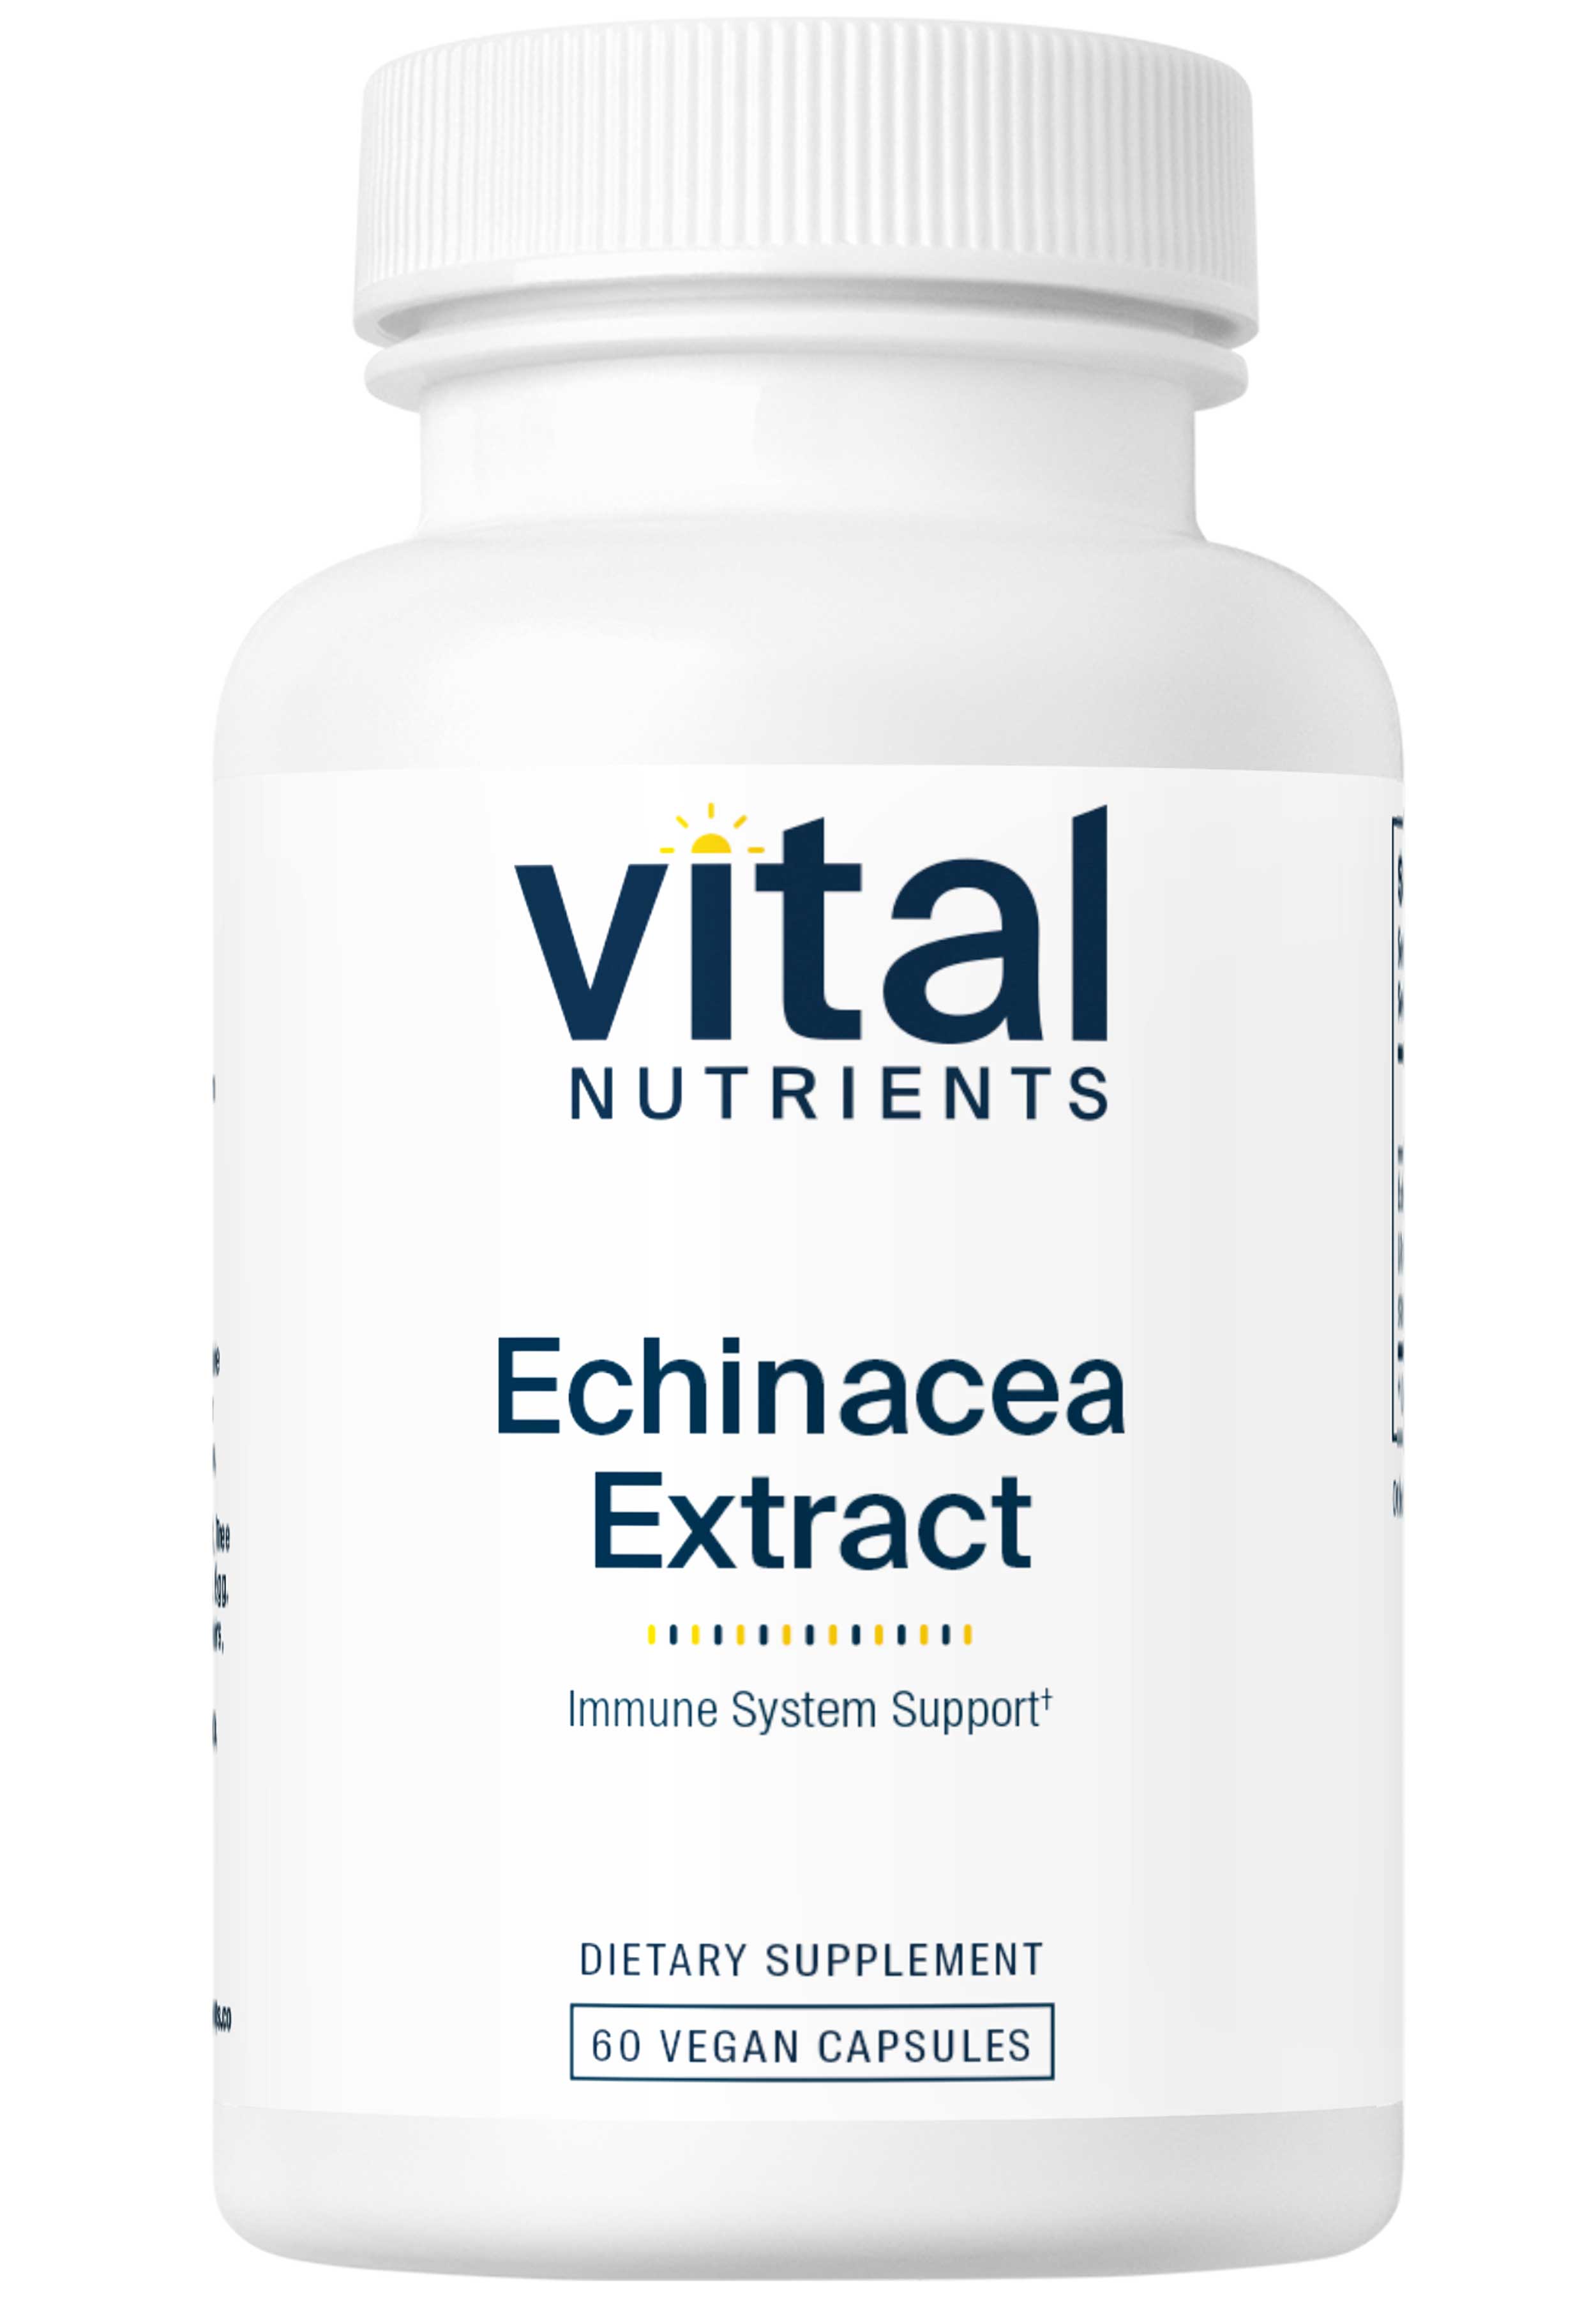 Vital Nutrients Echinacea Extract 1000mg (Formerly 500mg)